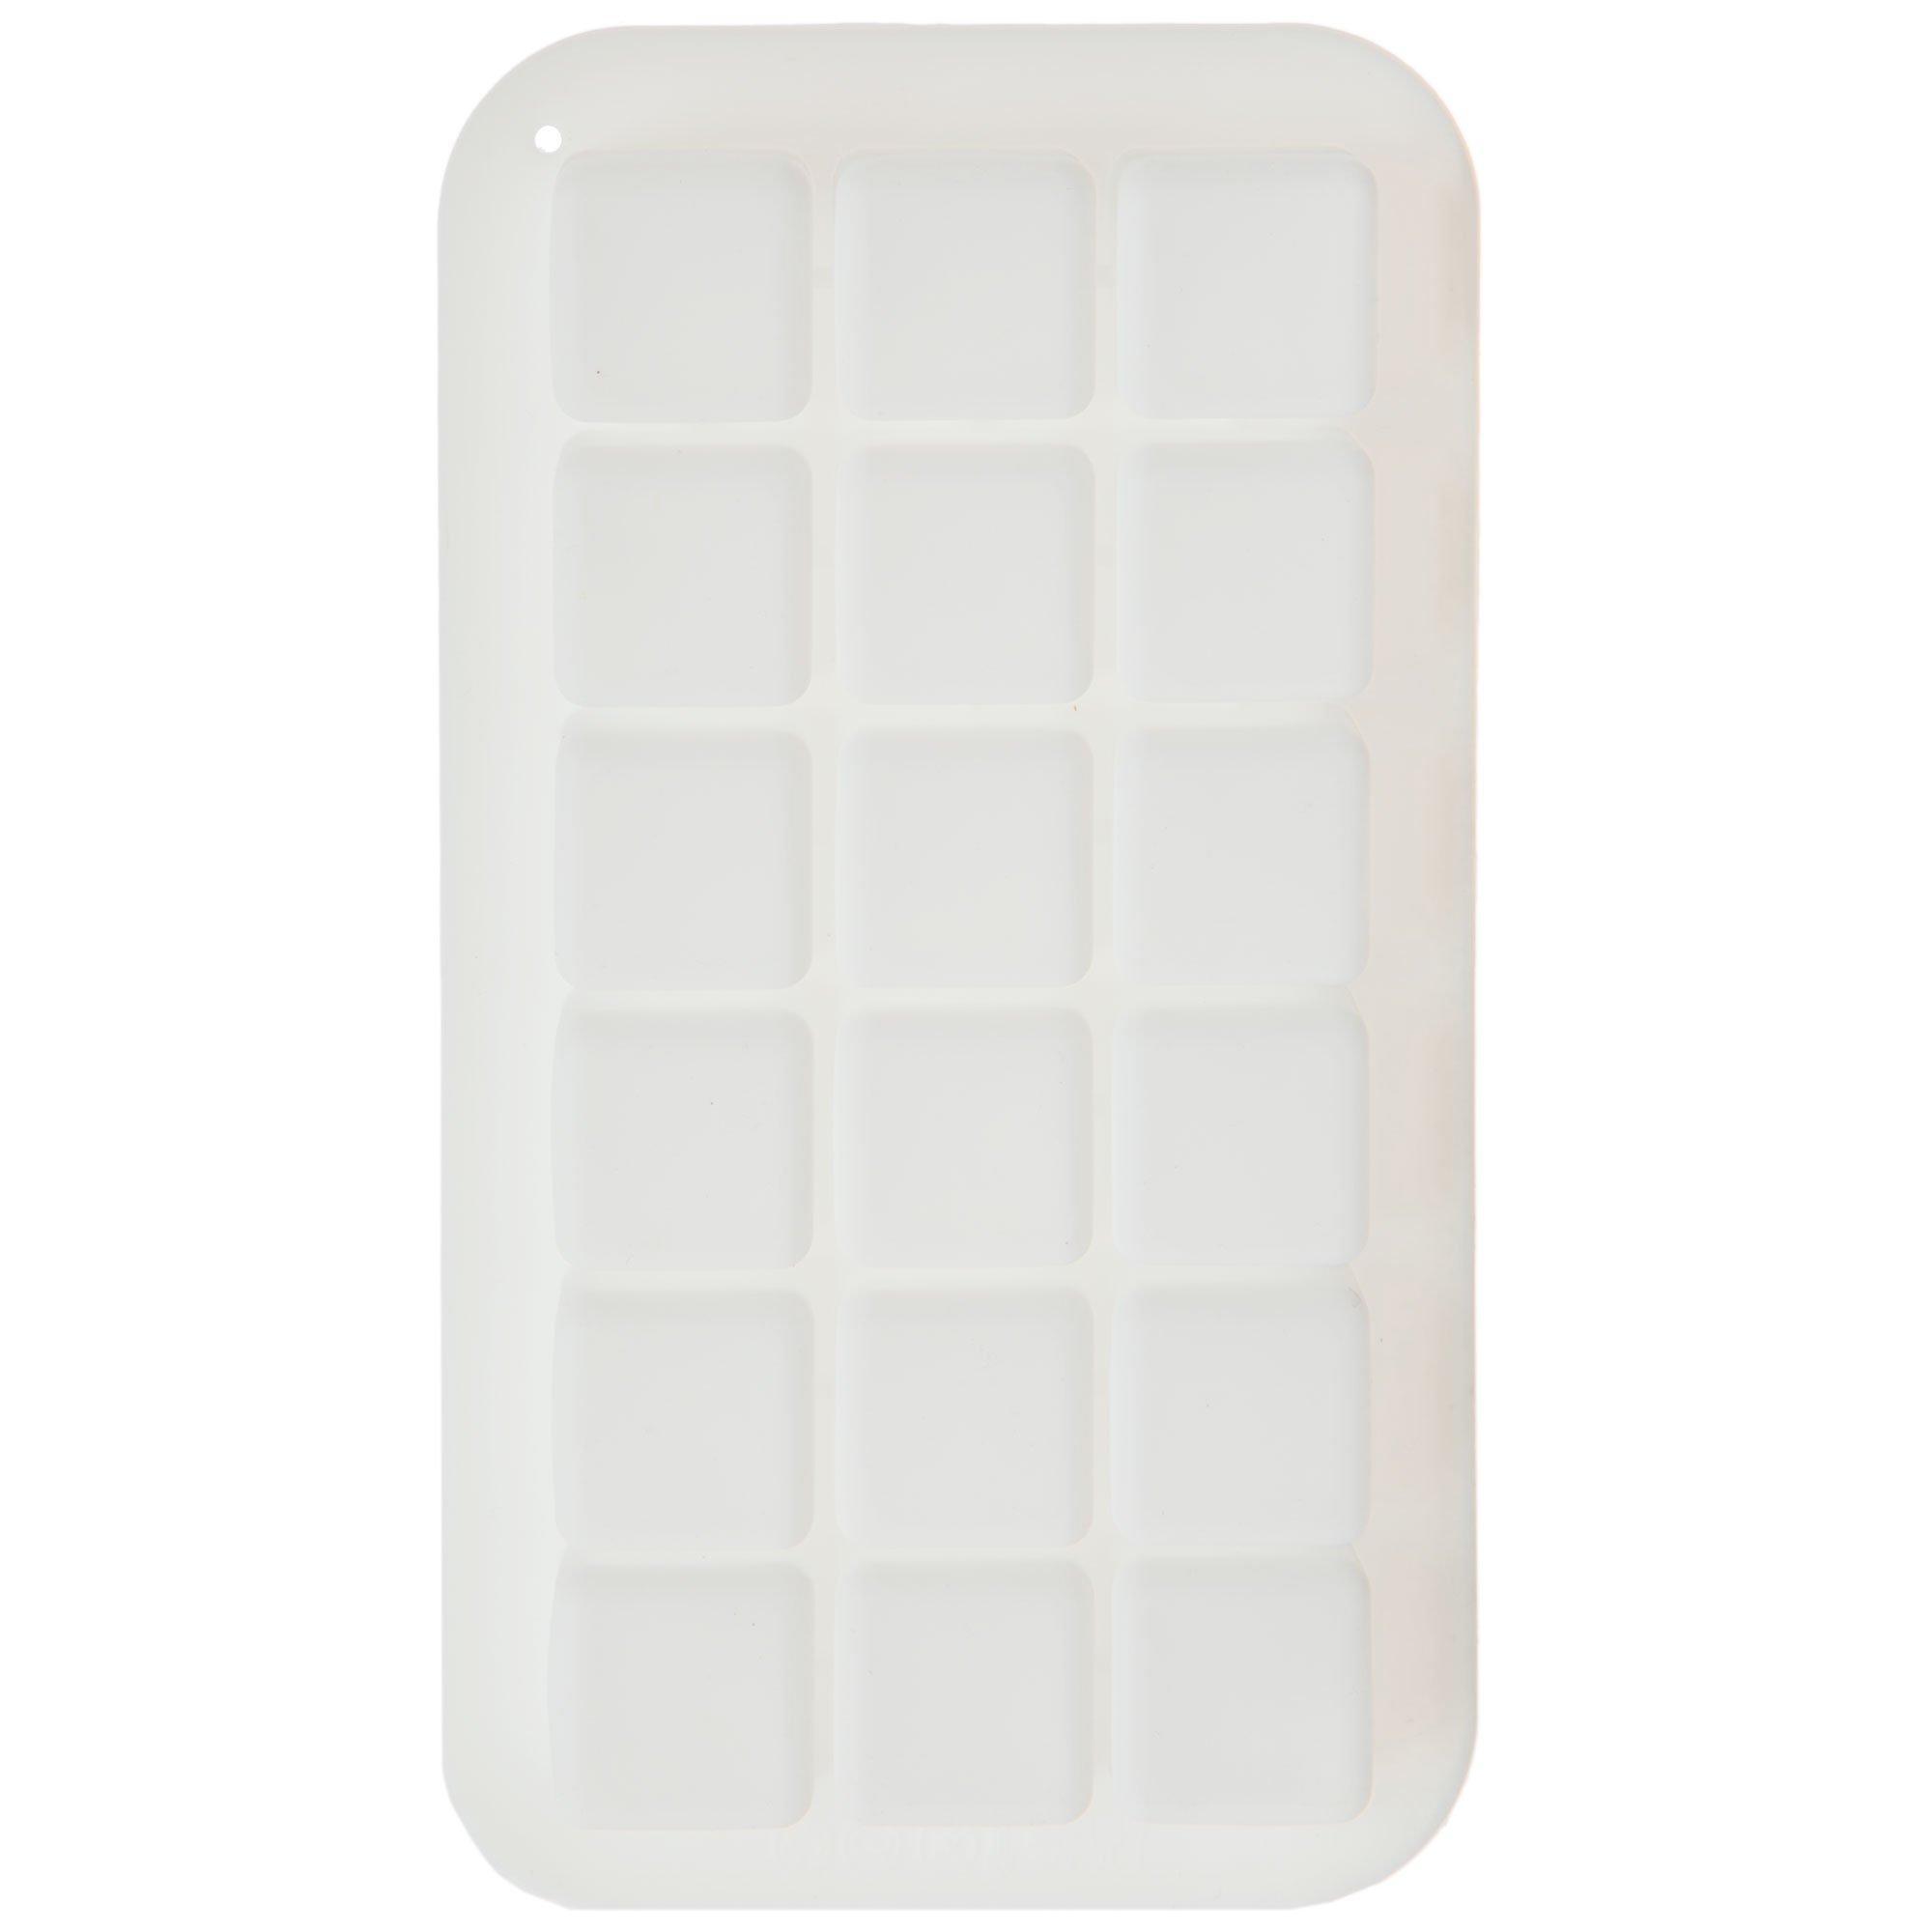 Silicone Soap Loaf Mold, Hobby Lobby